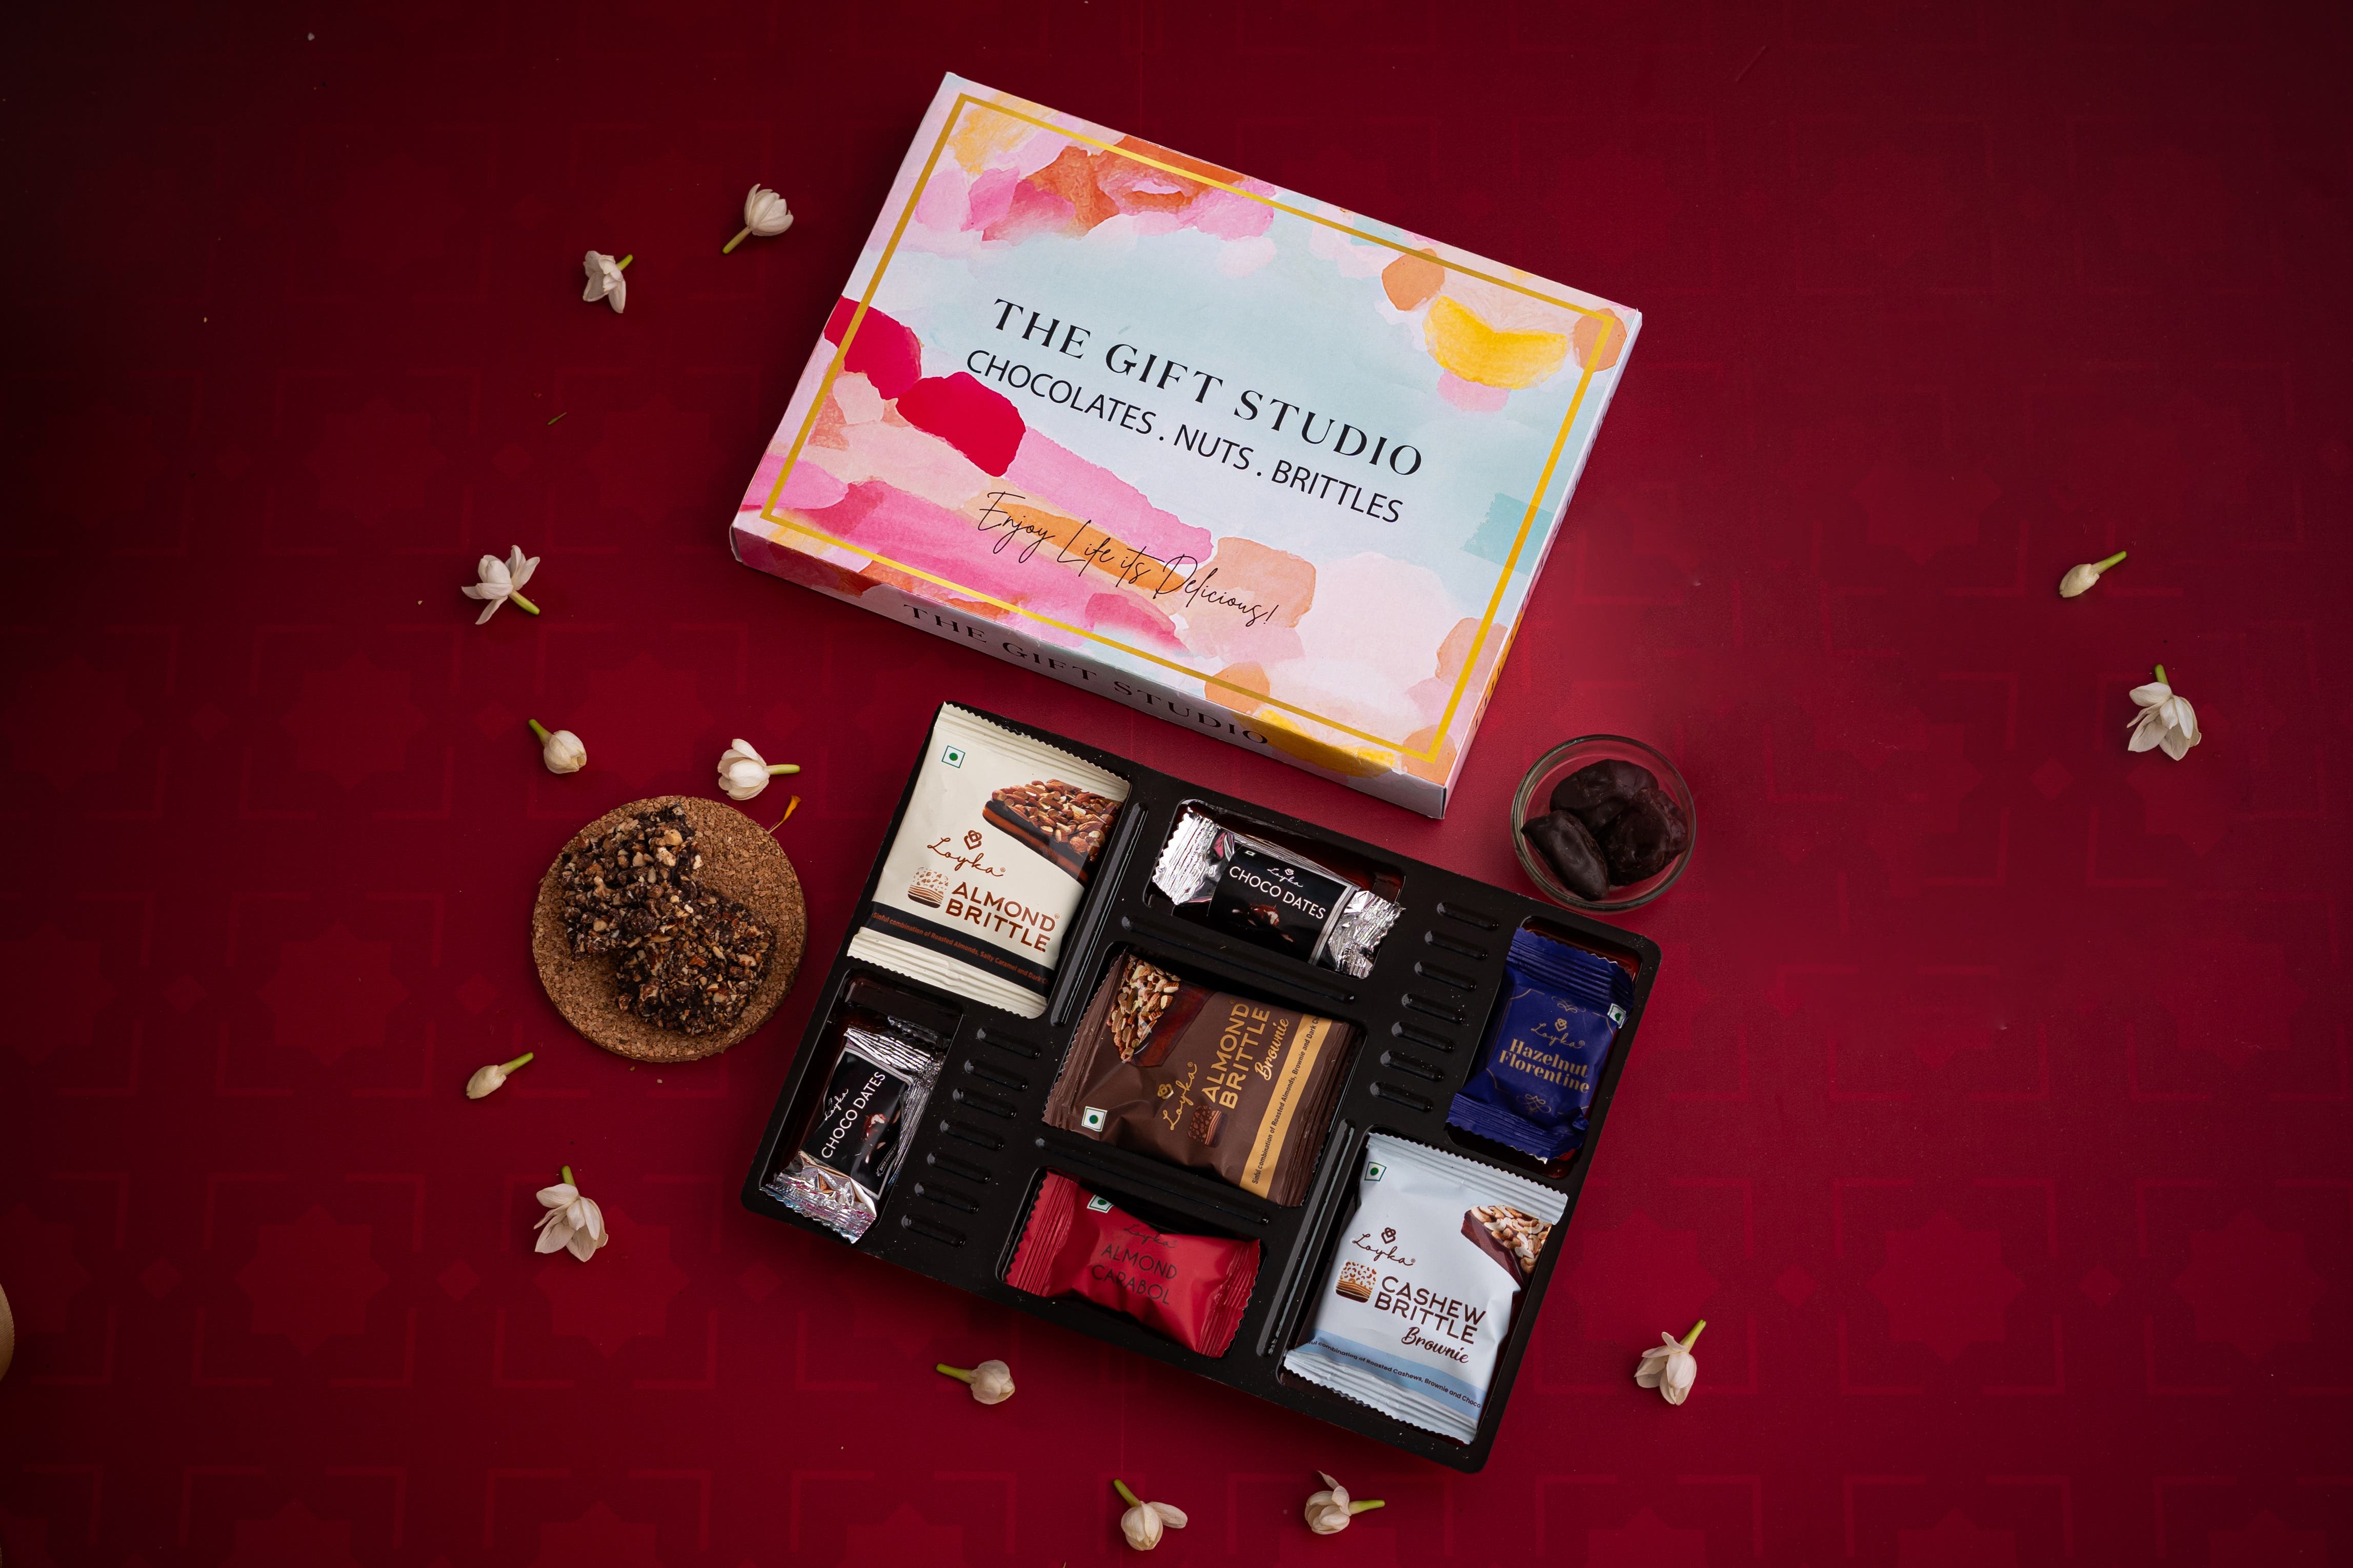 Occasion's Gift Box by The Gift Studio